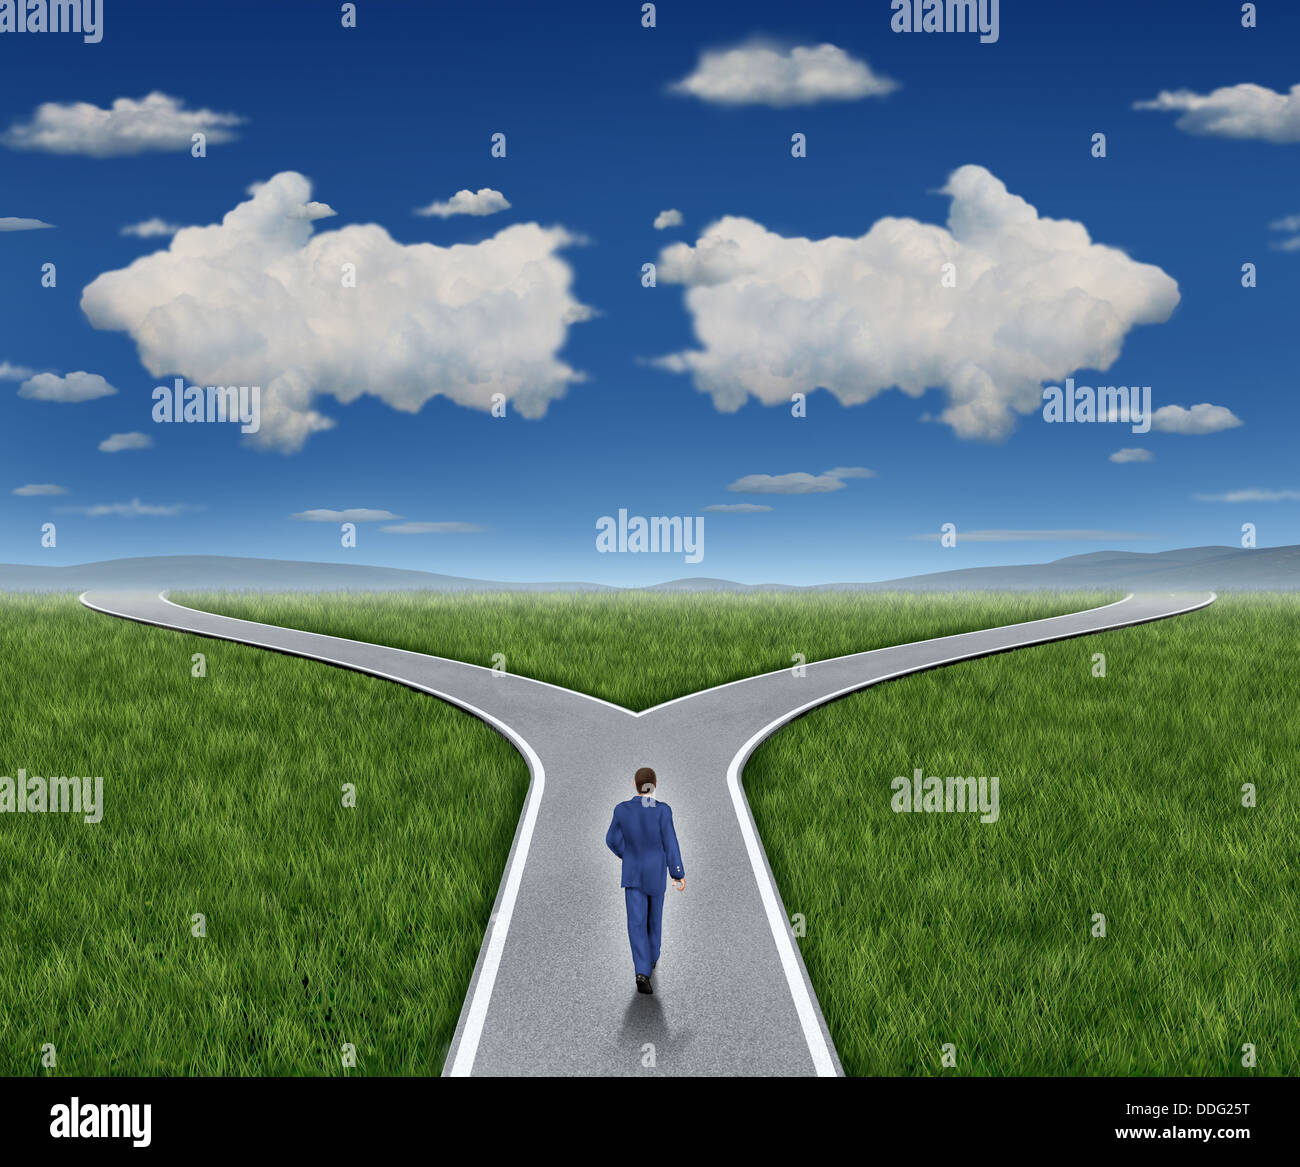 Business guidance questions and career path as a business person walking to a crossroad highway with two clouds shaped as arrows pointing in opposite directions on a blue summer sky and grass representing financial advice guide and looking for answers. Stock Photo